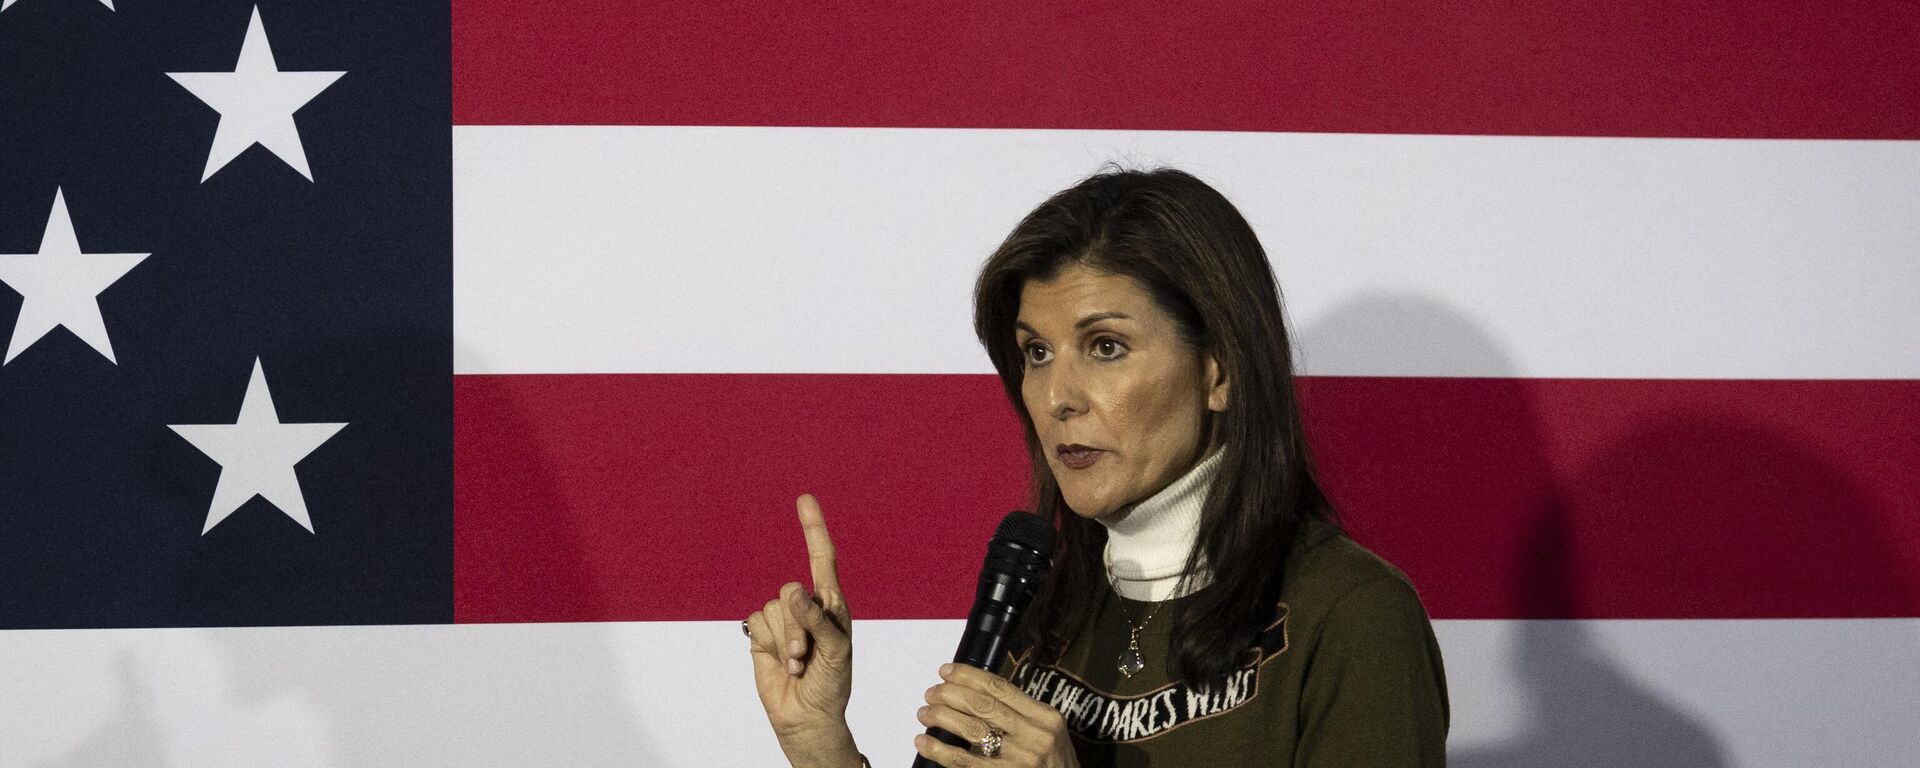 Former UN Ambassador and 2024 presidential hopeful Nikki Haley speaks at a campaign event in The James Theater in Iowa City, Iowa, on January 13, 2024. - Sputnik International, 1920, 22.01.2024